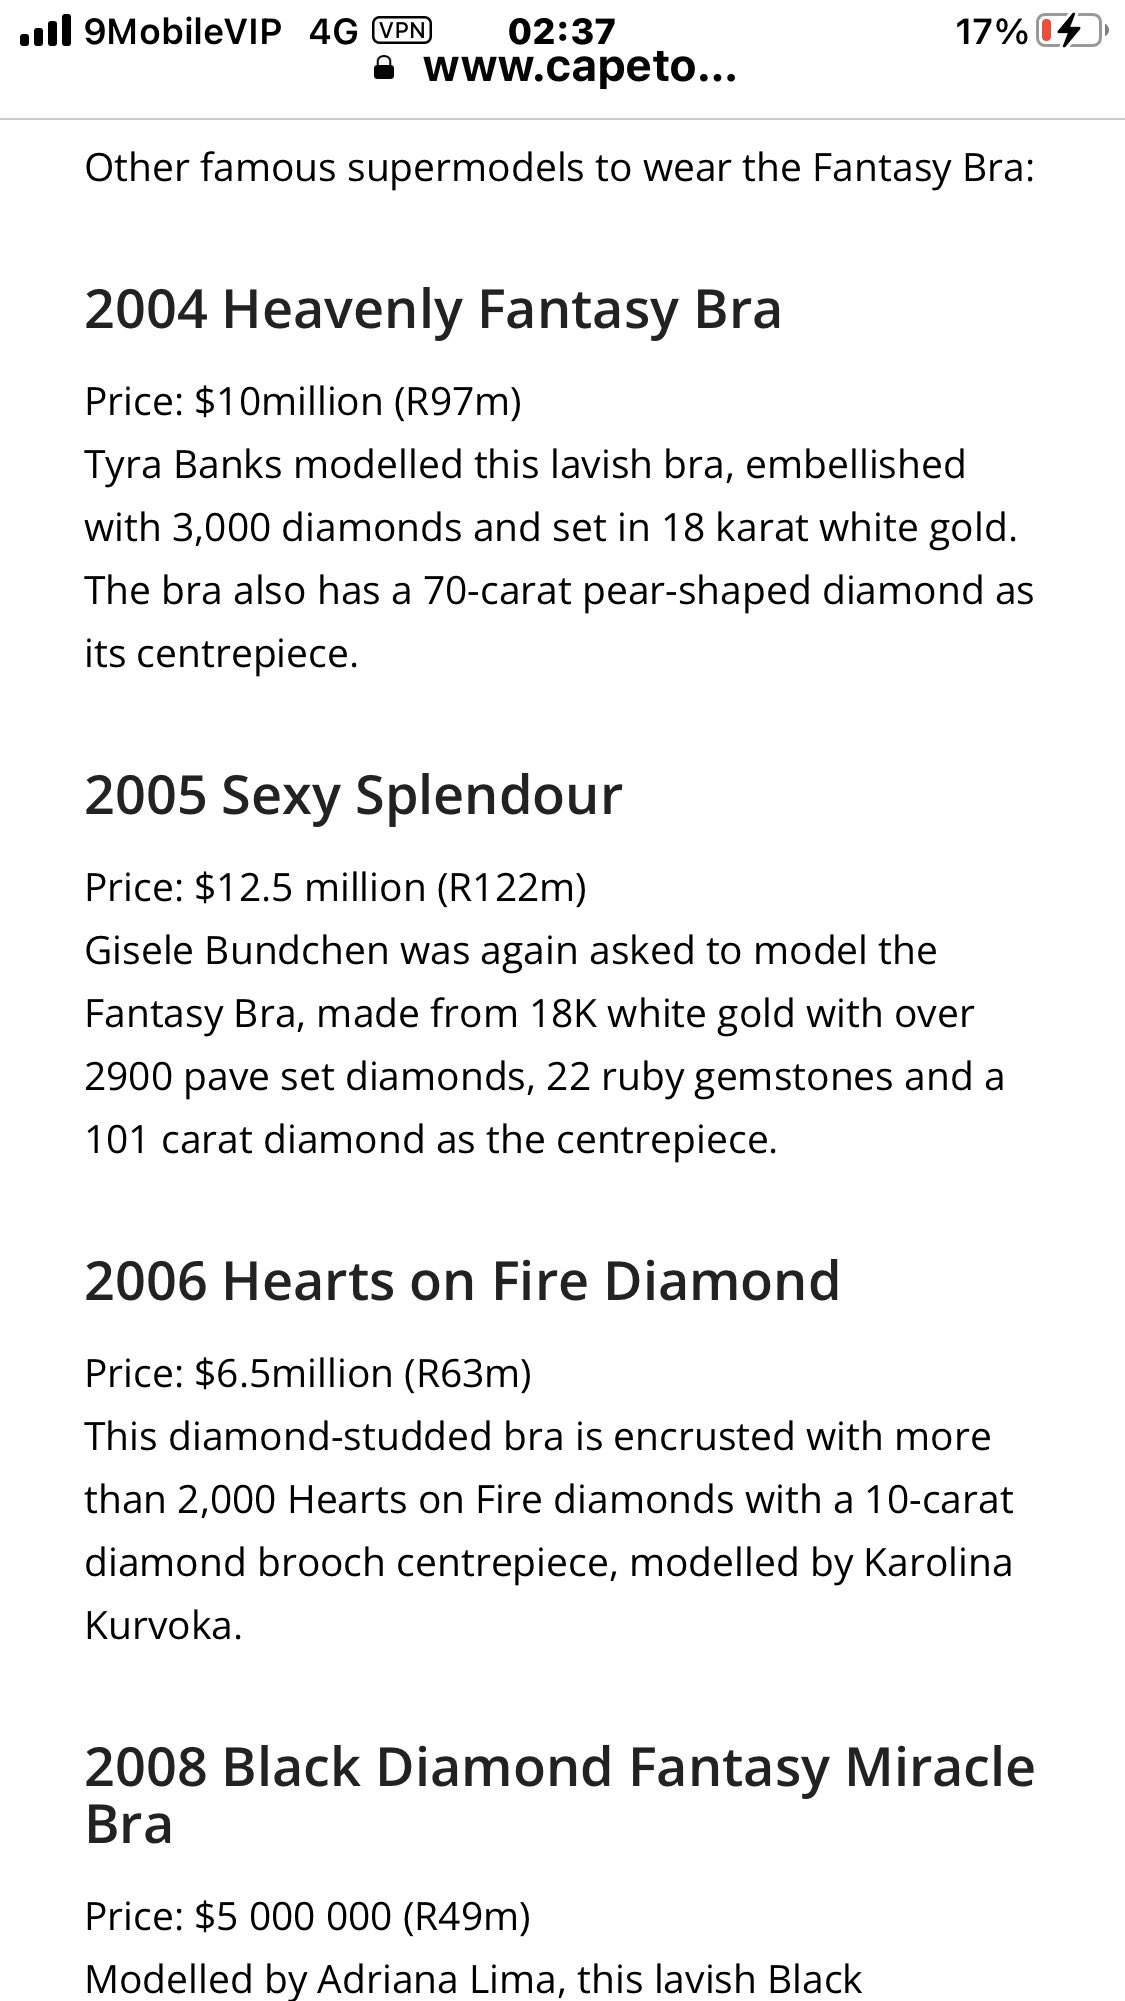 O.L.U.S.O.G.A. on X: They are not ordinary bras pls, The “Heavenly Star Bra”,  covered in star-shaped diamond patterns and a 90-carat emerald cut diamond  as its centrepiece, worth $12.5million. The “Very Sexy